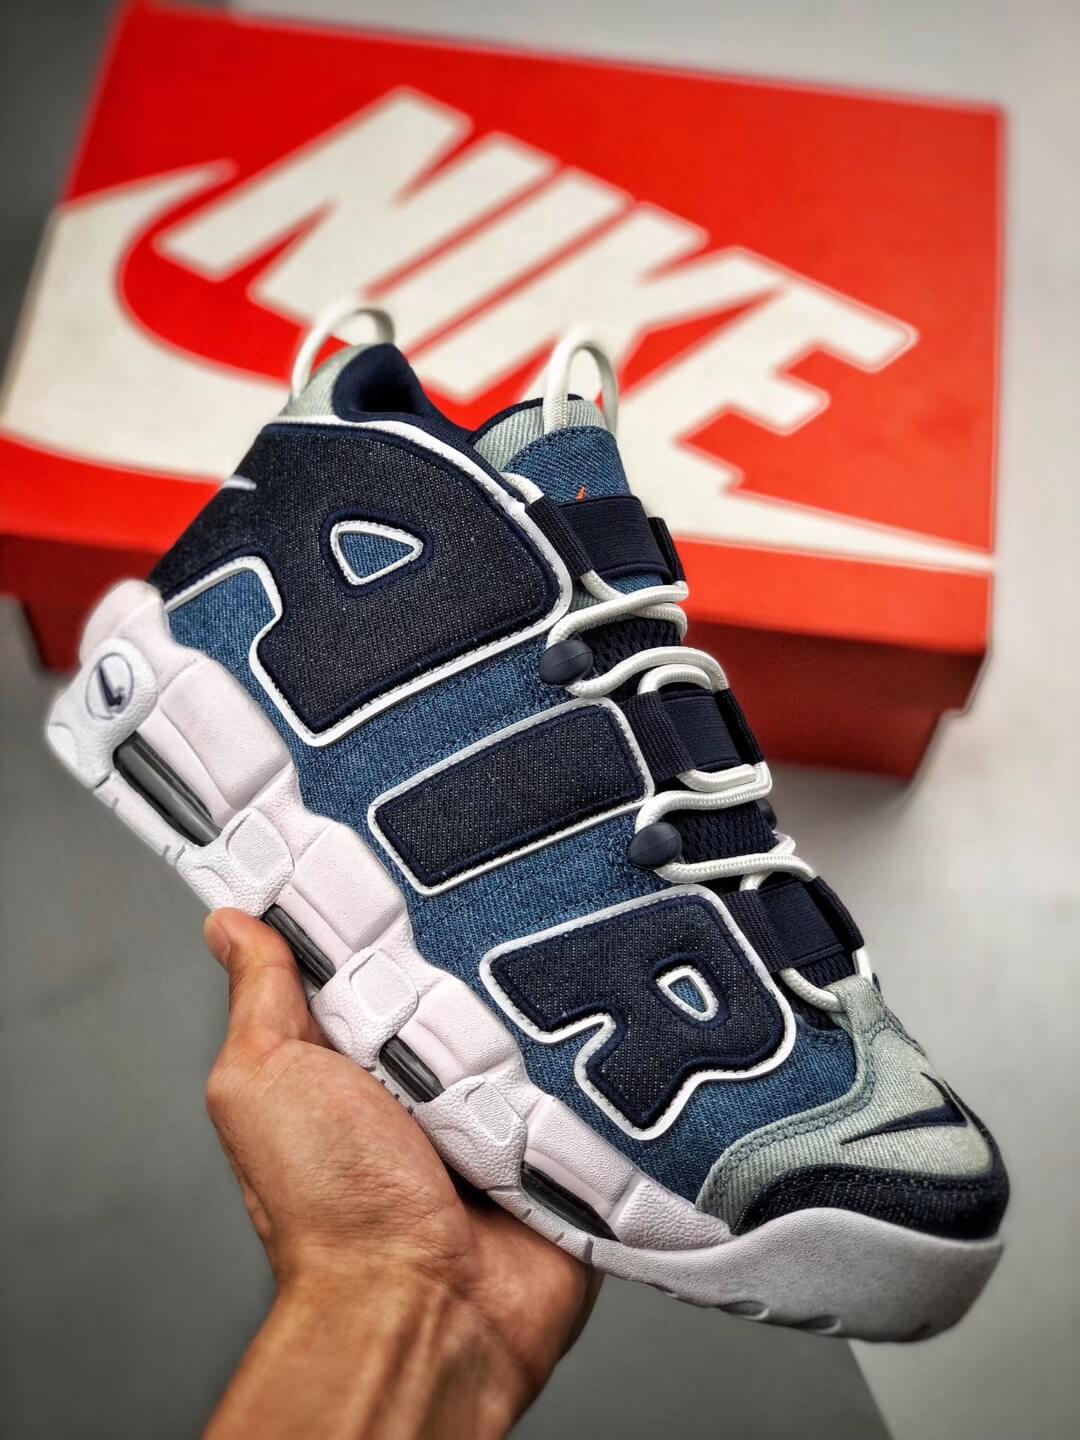 The Air More Uptempo 96 Denim Sneaker Blue Jean Fabric Style Large Air Scottie Pippen Repshoes The Quality Replica Sneakers Supplier In China